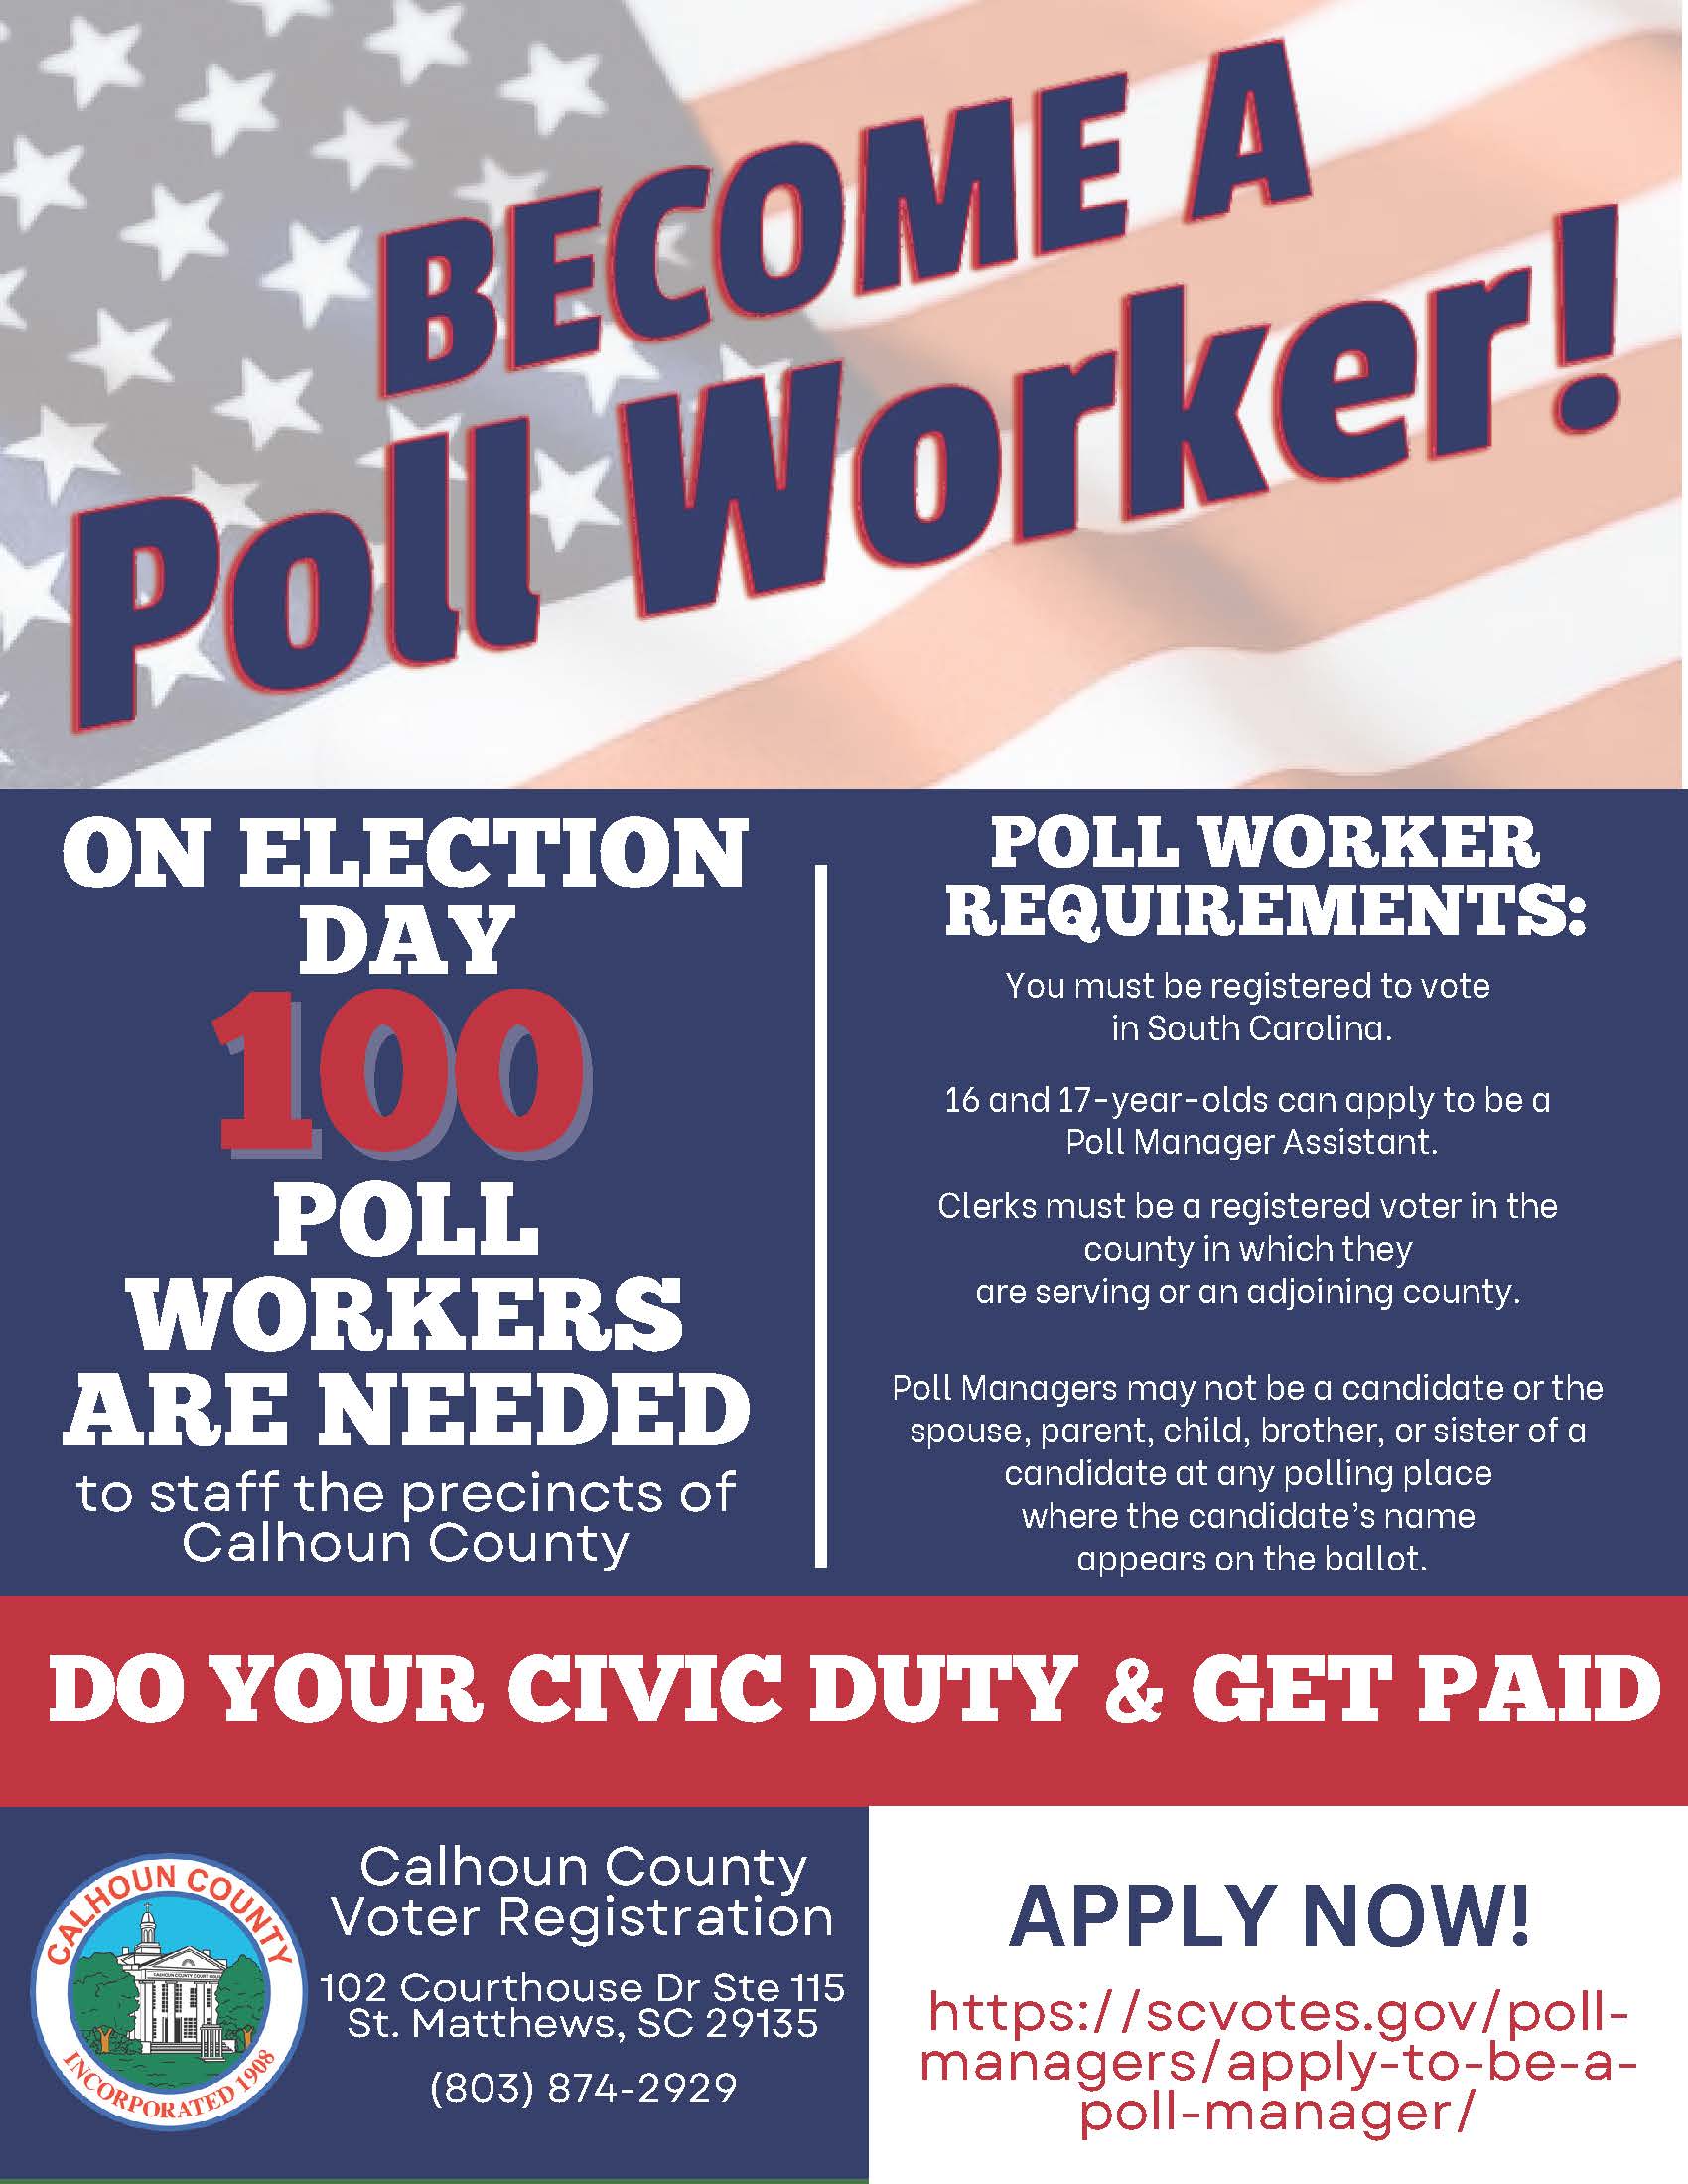 Calhoun County is Actively Recruiting Poll Workers!